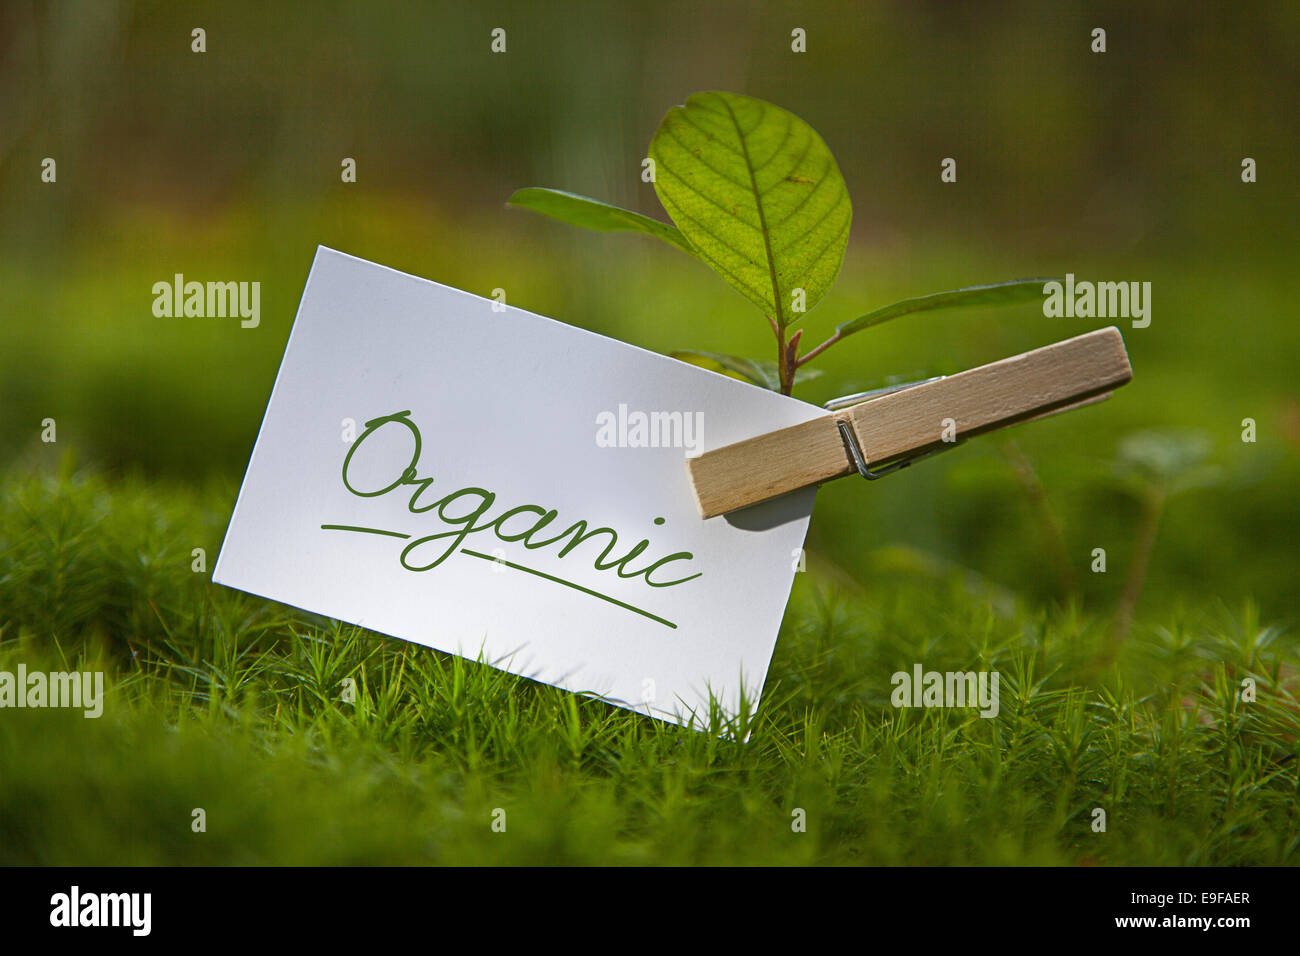 Organic on paper with a seedling Stock Photo